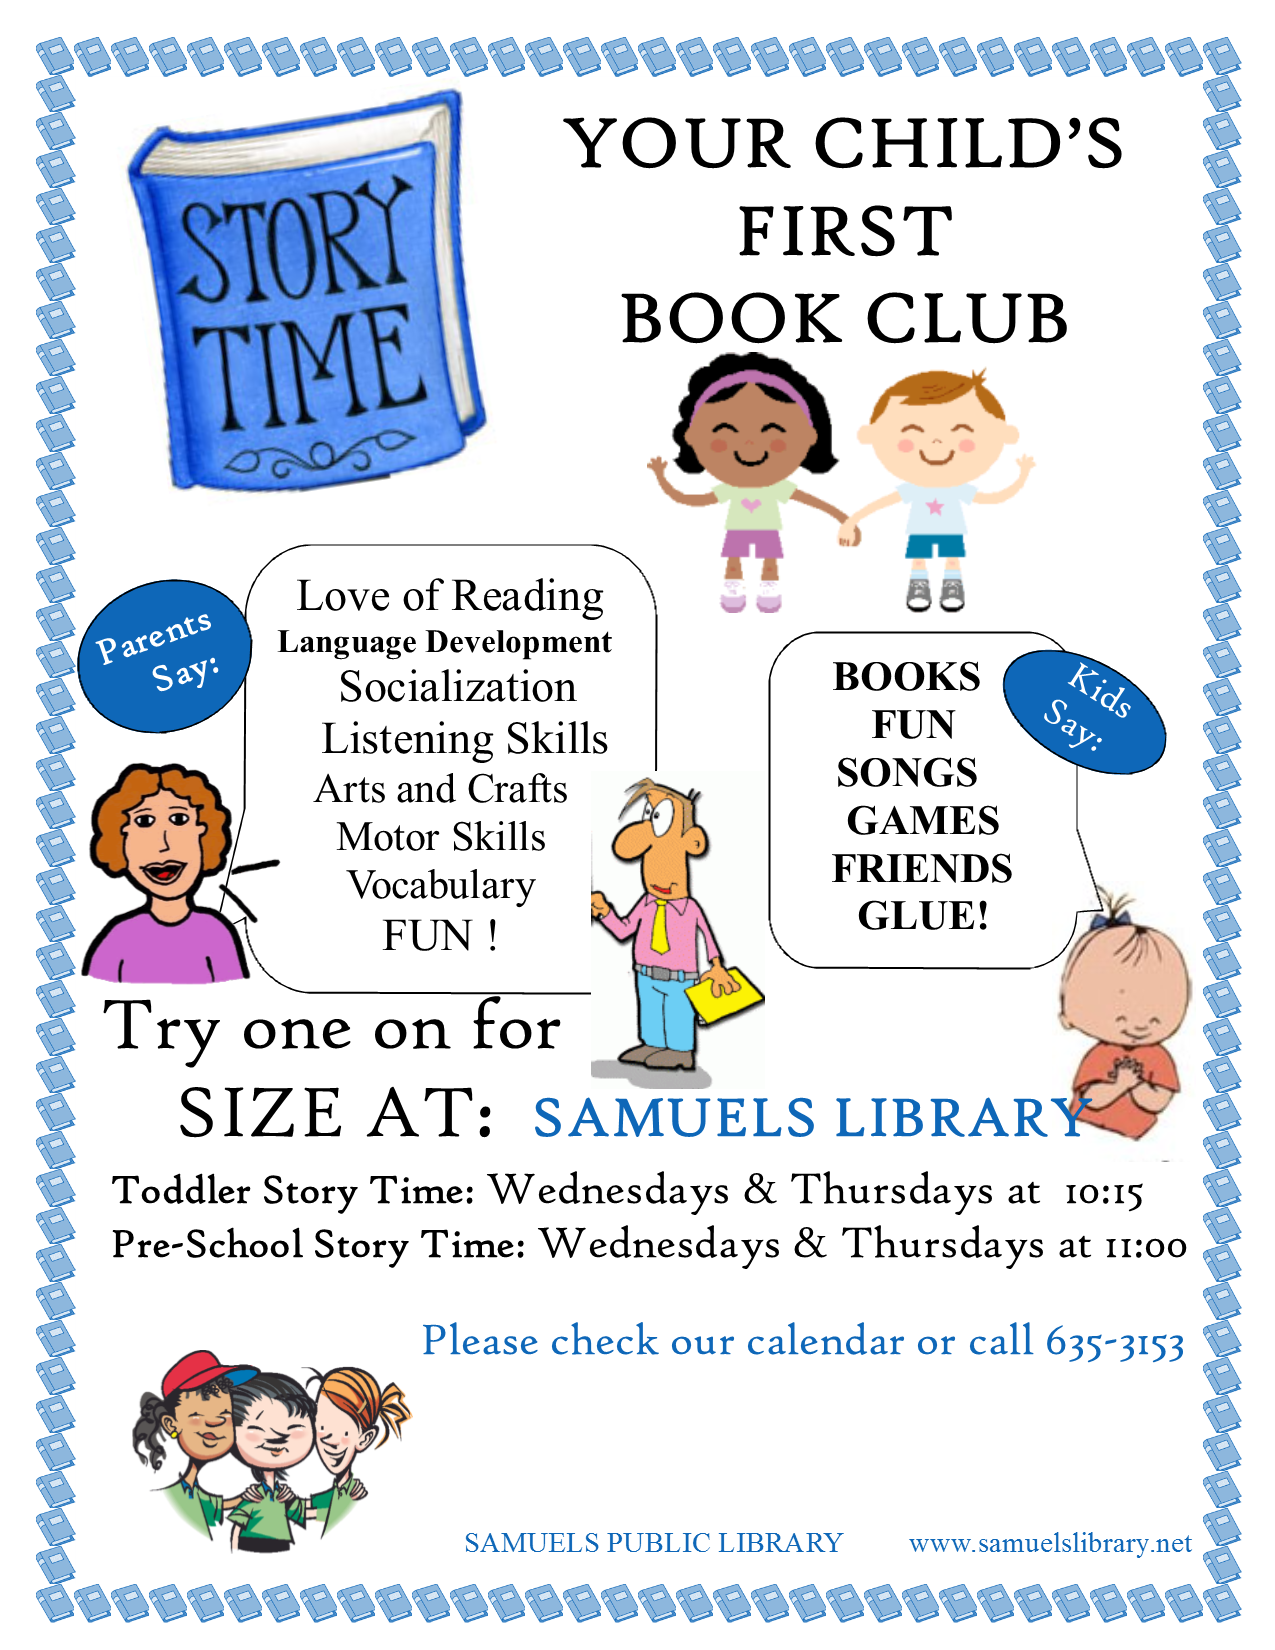 Toddler Story times meet on Wednesdays and Thursdays.